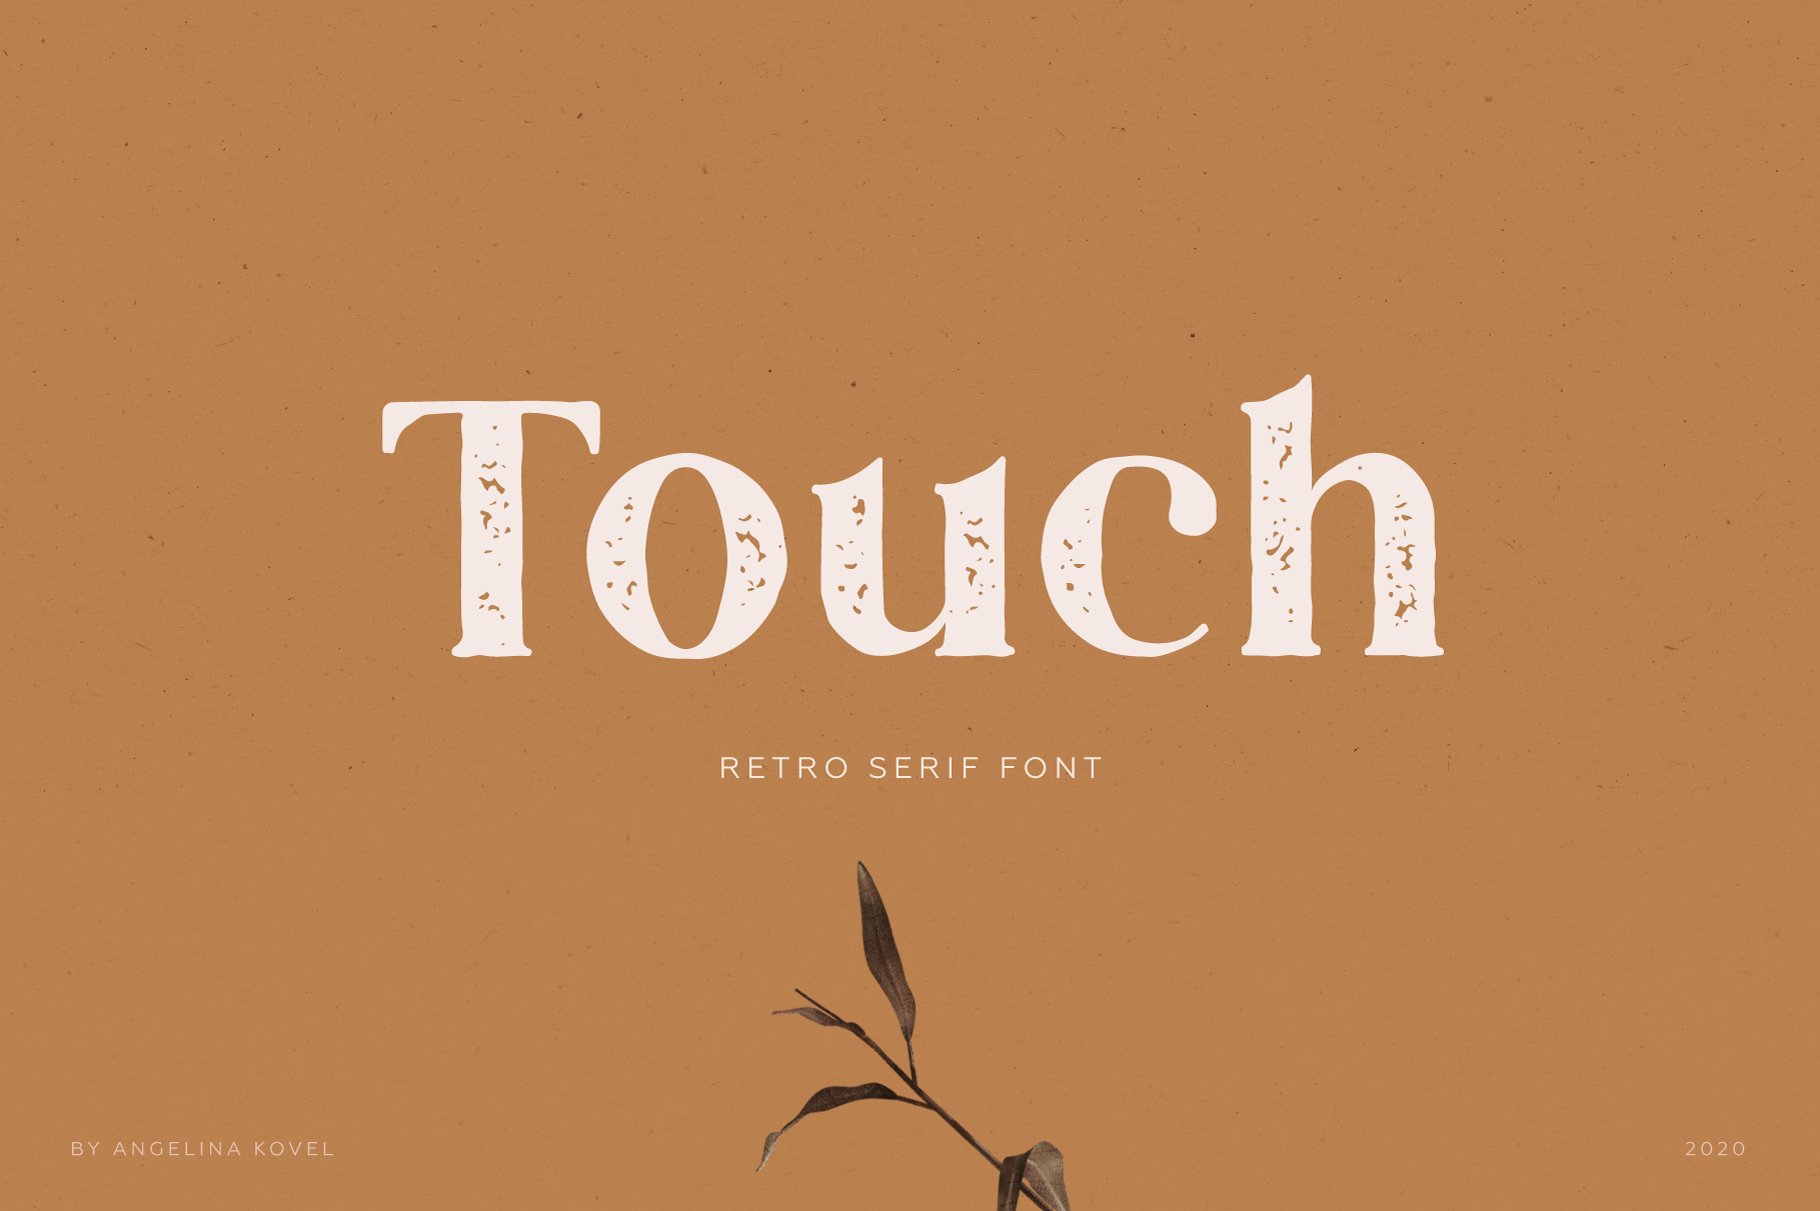 Touch | Serif Font cover image.